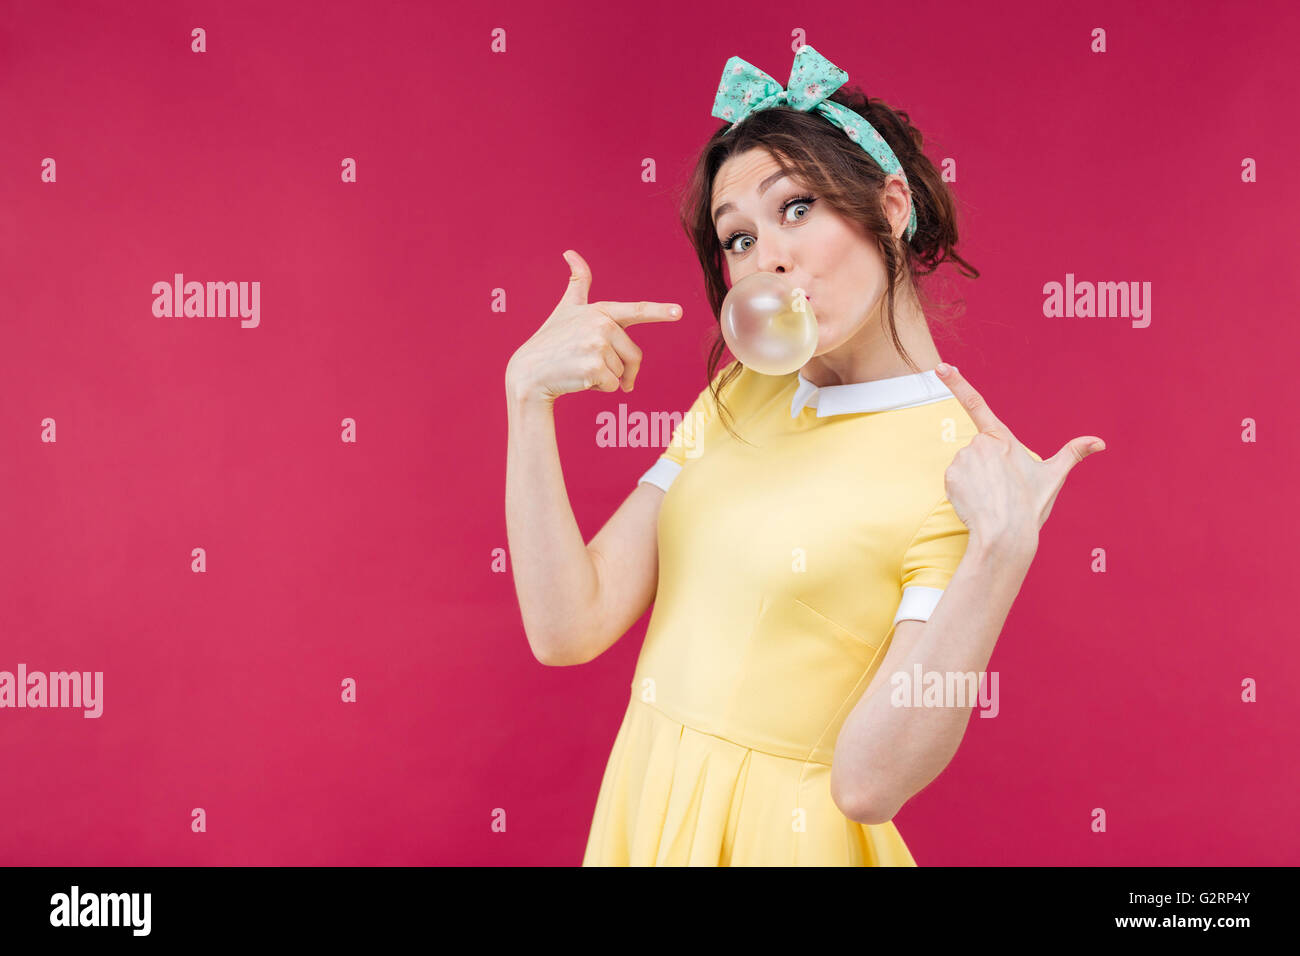 Playful charming young woman in yellow dress pointing on bubble gum balloon over pink background Stock Photo